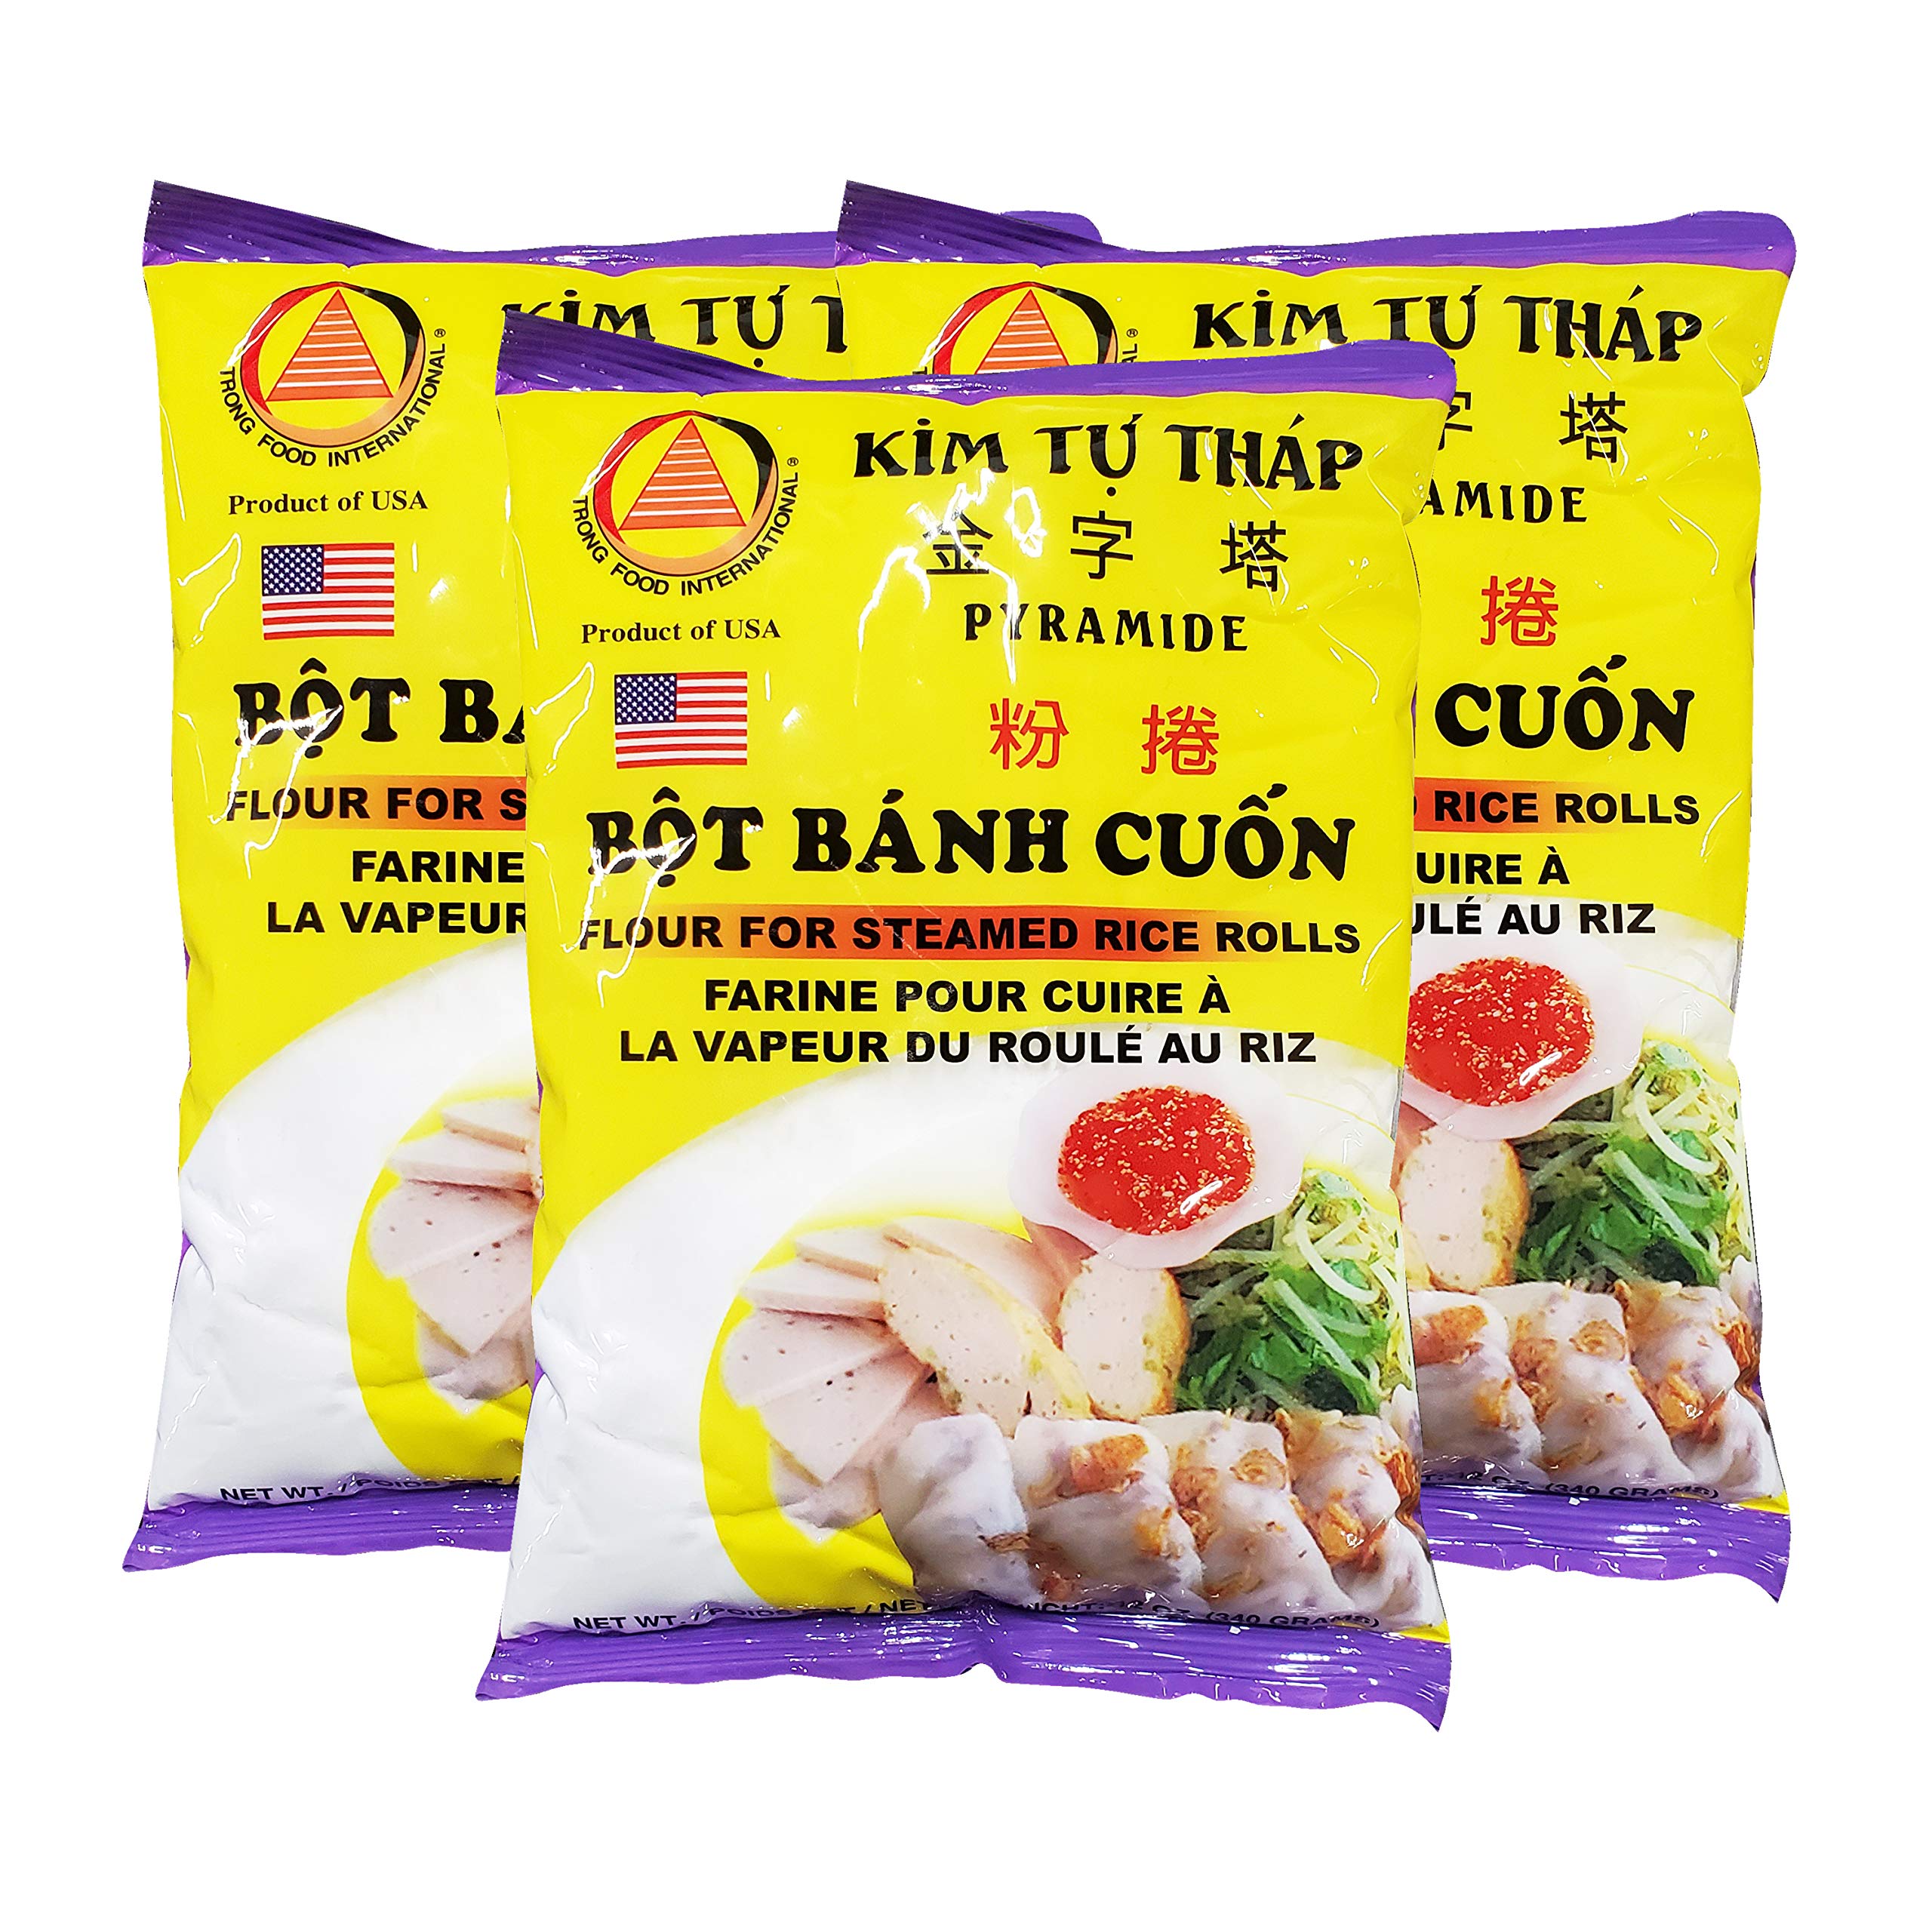 Kim Tu Thap Pyramide Bot Banh Cuon - Flour for Steamed Rice Rolls (3 Pack, Total of 36oz)